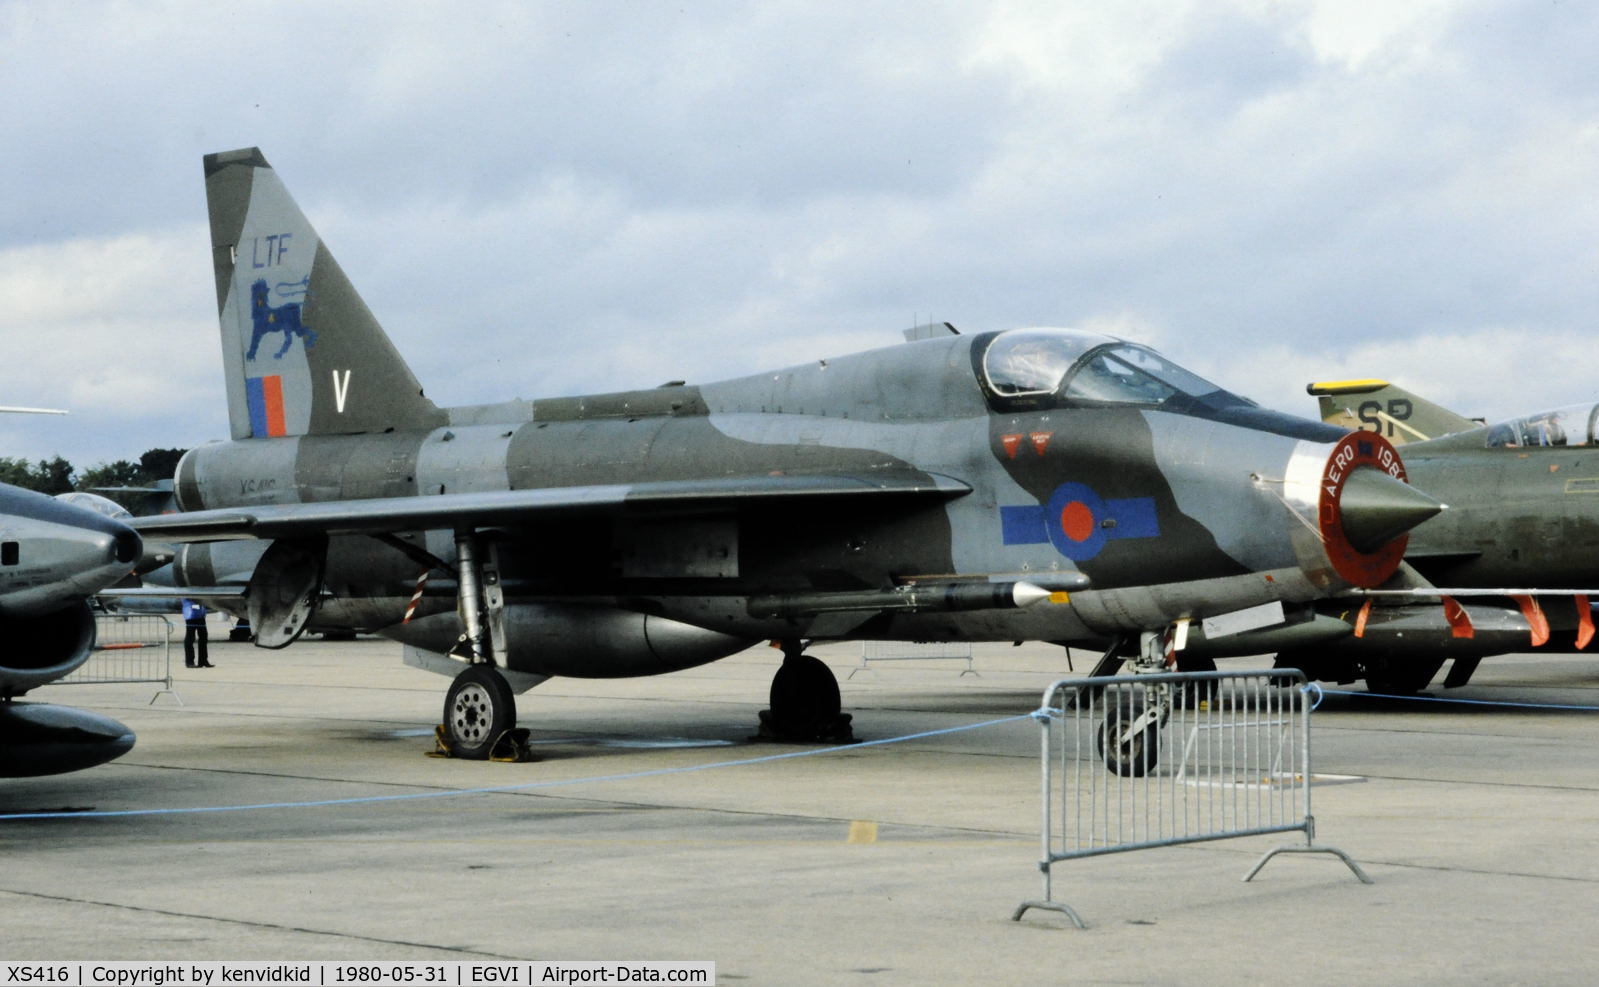 XS416, 1962 English Electric Lightning T.5 C/N 95001, At the 1980 International Air Tattoo Greenham Common, copied from slide.